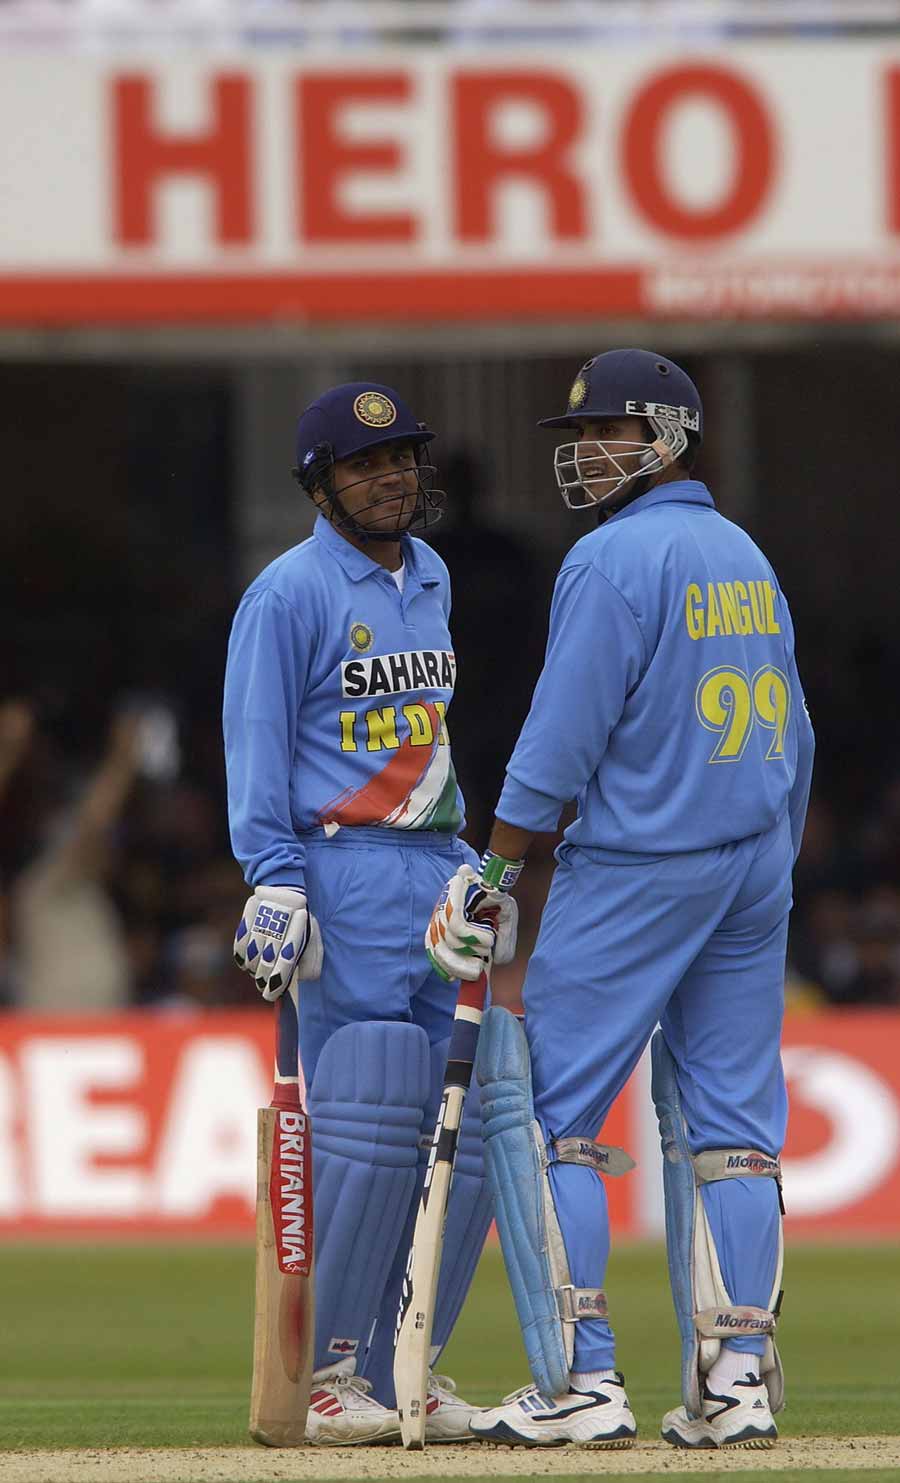 The Ganguly and Sehwag show: It was one of those days when nothing went right for England. Having scored 269 runs against India in Colombo as part of a vital match at the 2002 ICC Champions Trophy, the English bowling was taken to the cleaners by Ganguly and Virender Sehwag. The pair put on 192 inside 29 overs, with Sehwag teeing off as Ganguly played sheet anchor. After Sehwag bowed out for 126, Ganguly, first with Laxman and then Tendulkar, polished off the rest of the chase, finishing on an unbeaten 117 off 109 deliveries